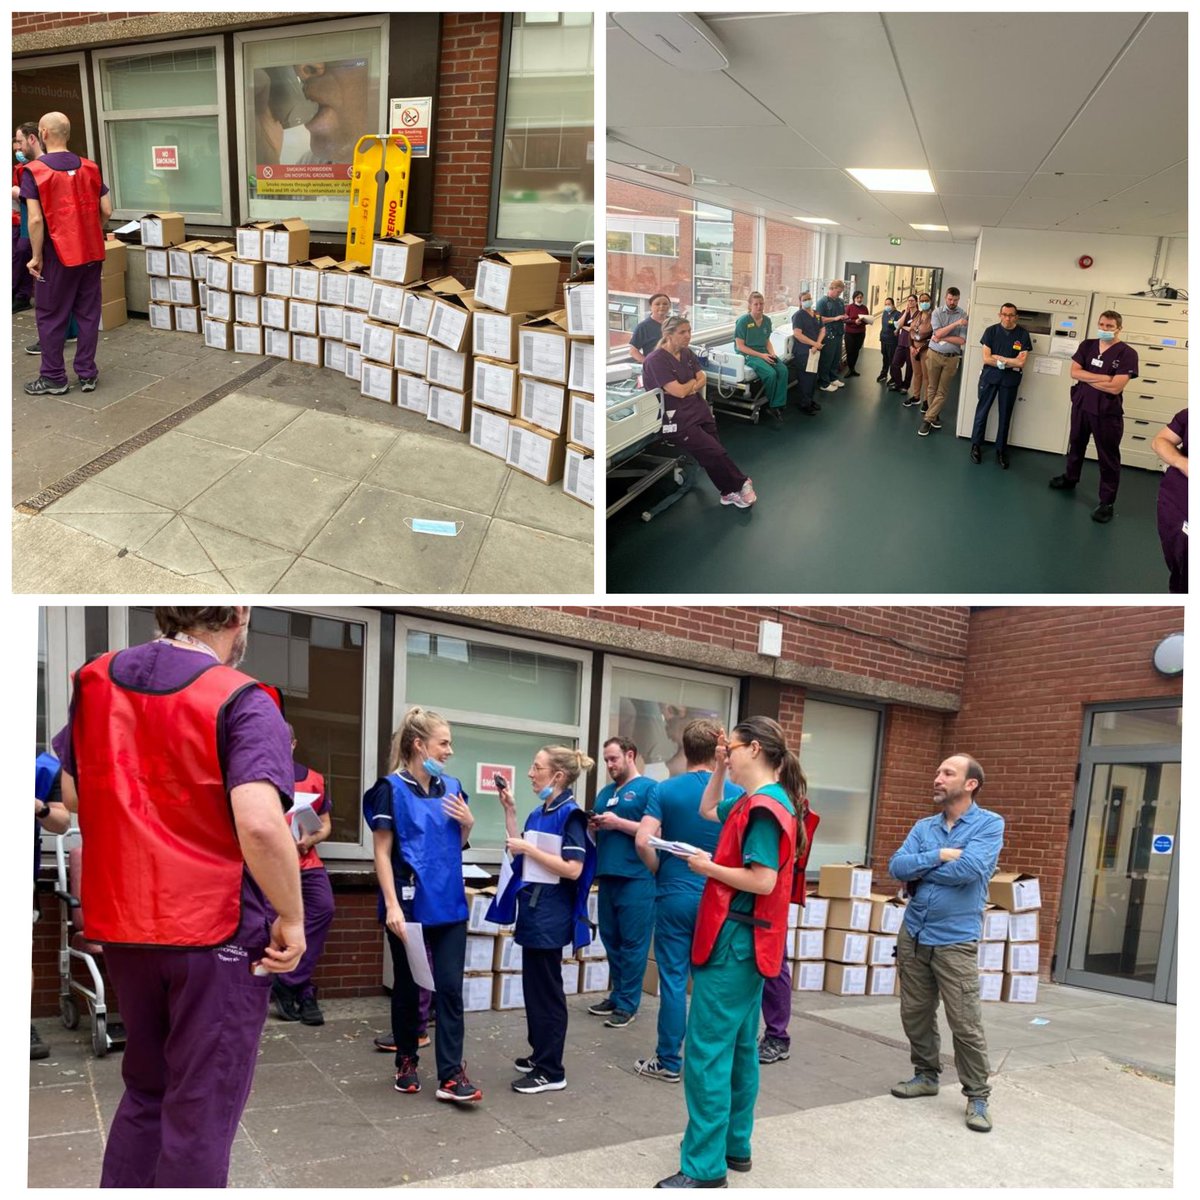 #ThrowbackThursday to when @StGeorgesTrust conducted 'Tooting blast' a major incident simulation for training purposes. Making sure we are prepared to respond to a mass casualty incident, with a smooth and rehearsed reaction. 💪🏥 #OutstandingCareEveryTime #MajorTrauma #Training